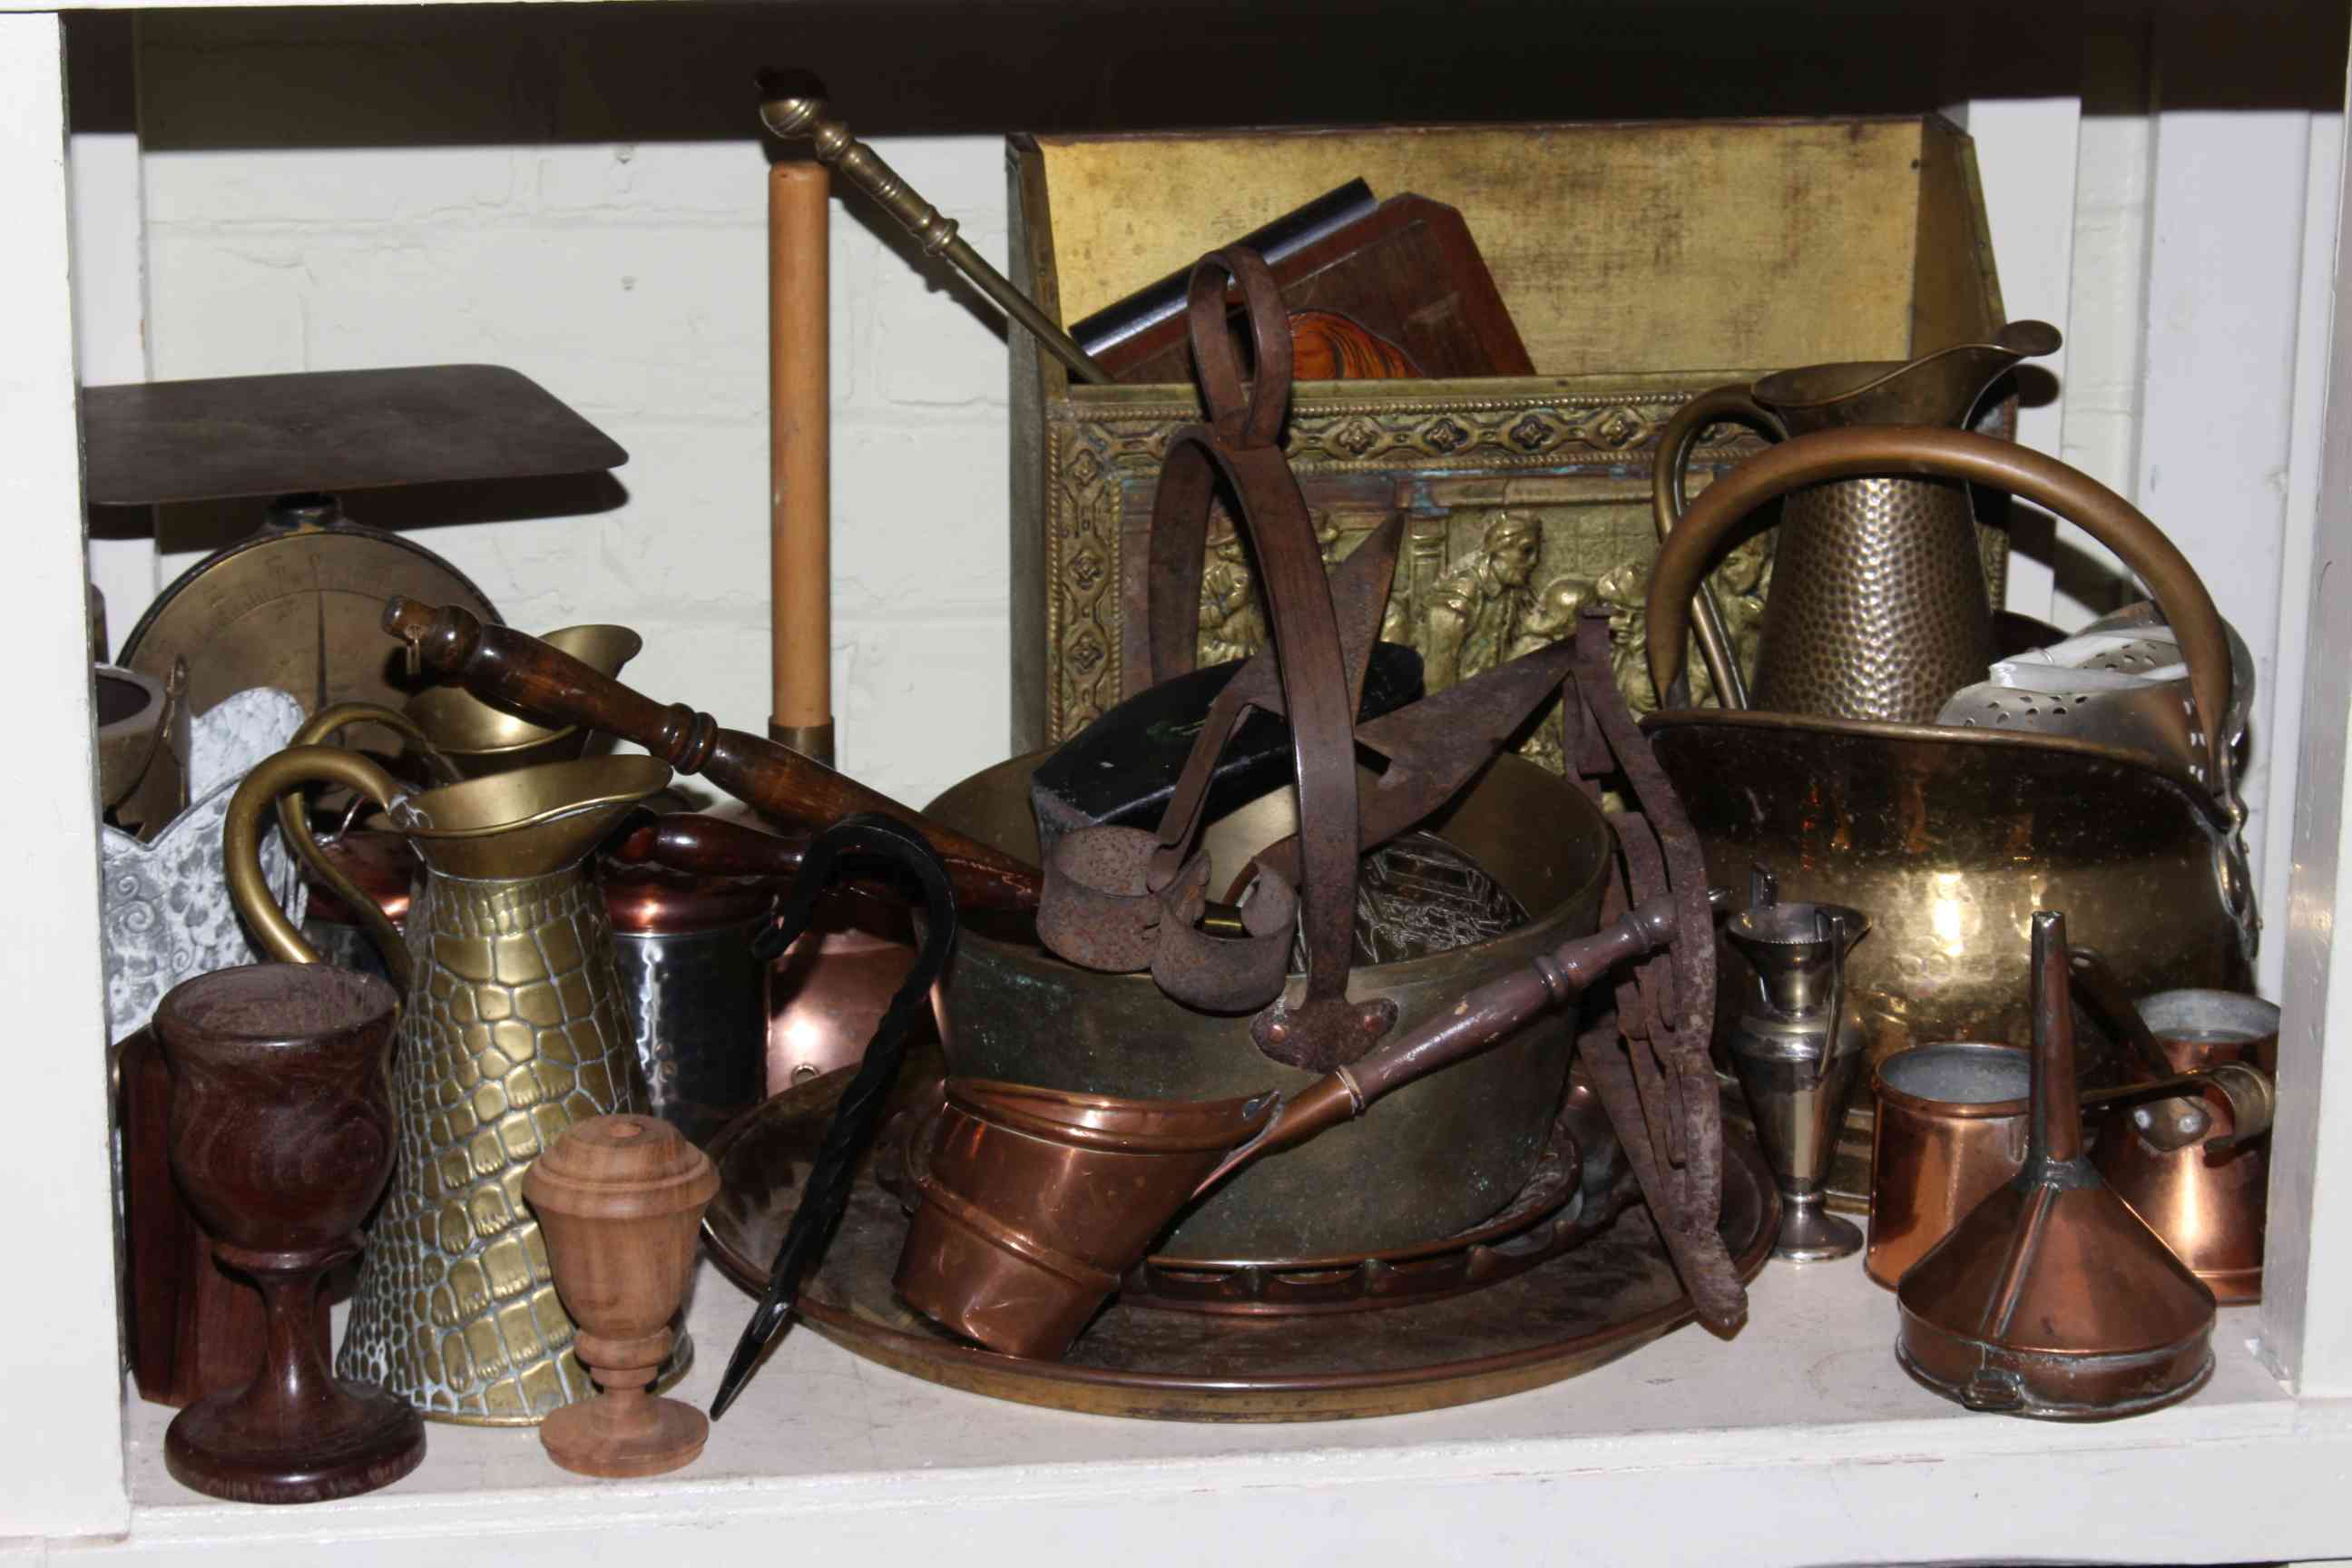 Large collection of copper and brass including horsebrasses, wood planes, shoe lasts, - Image 3 of 3